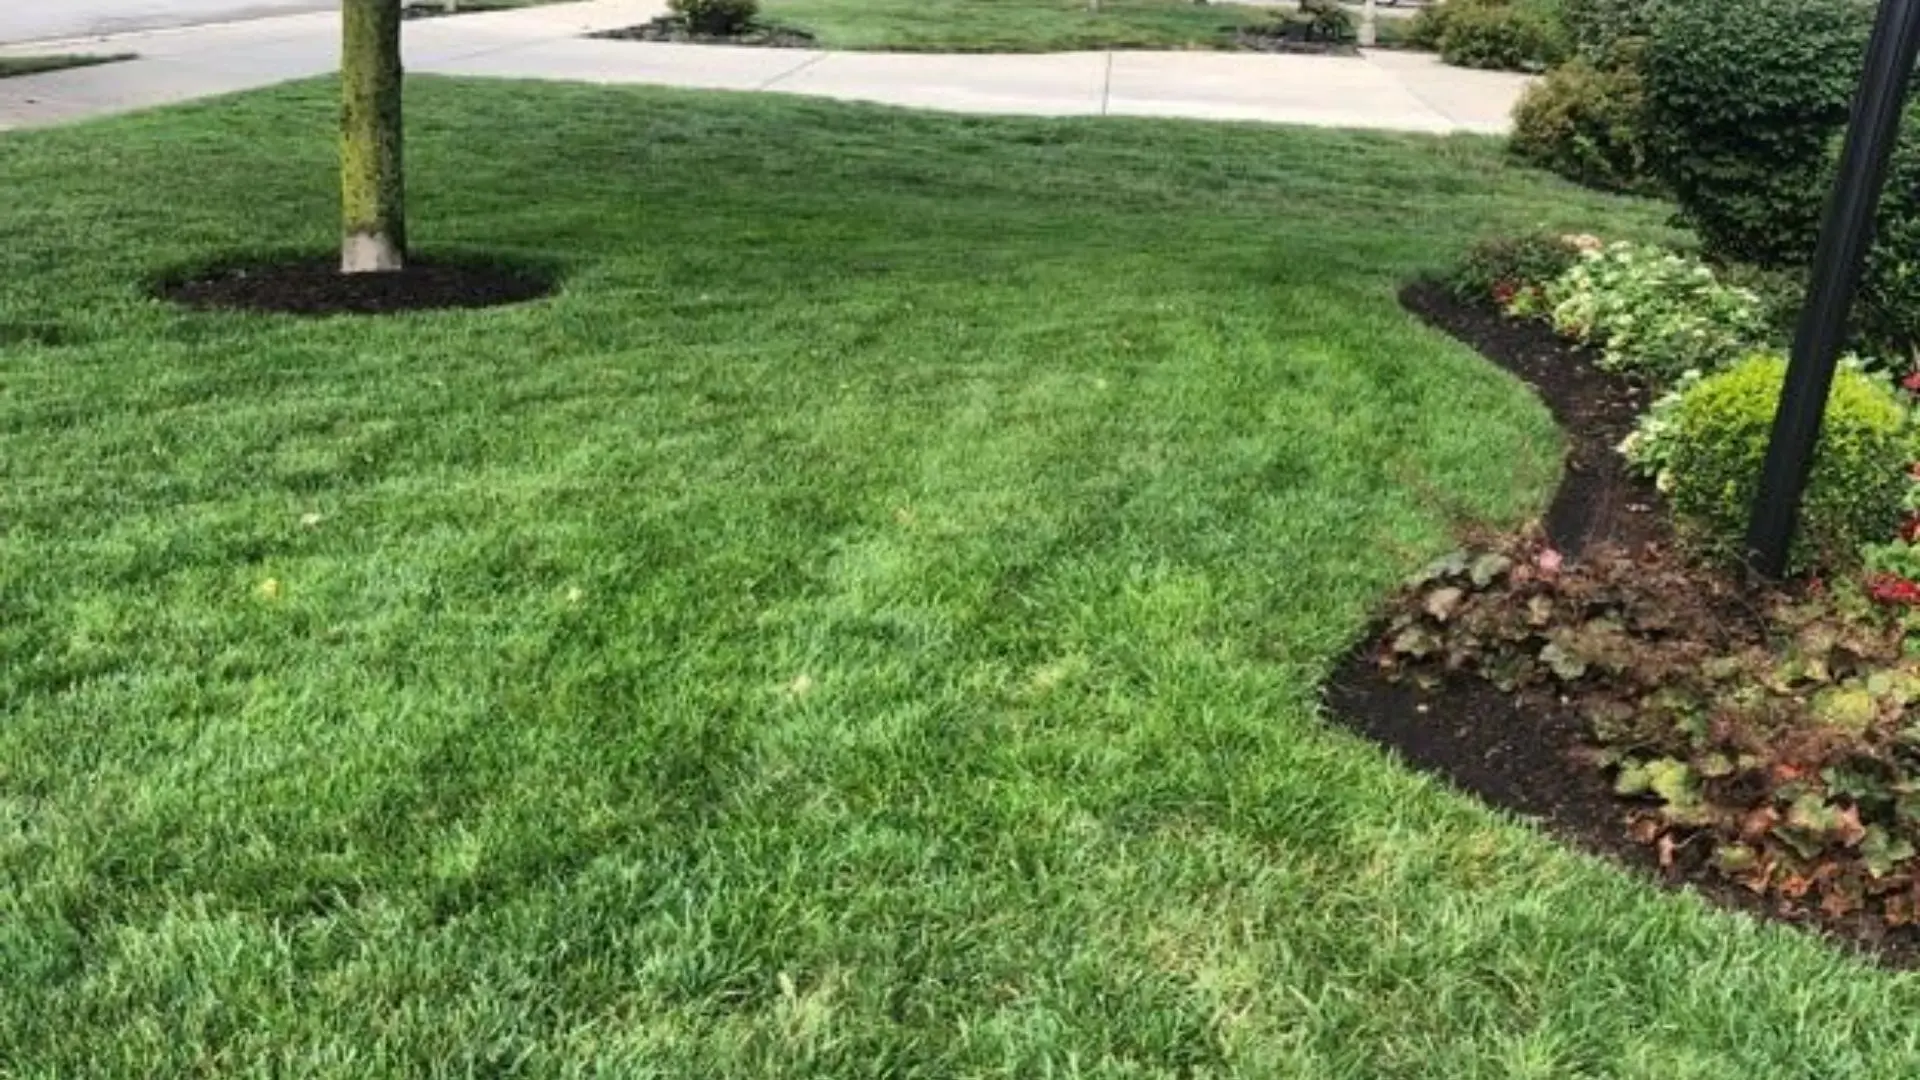 Maintained lawn by Green Again professionals in McCordsville, IN.